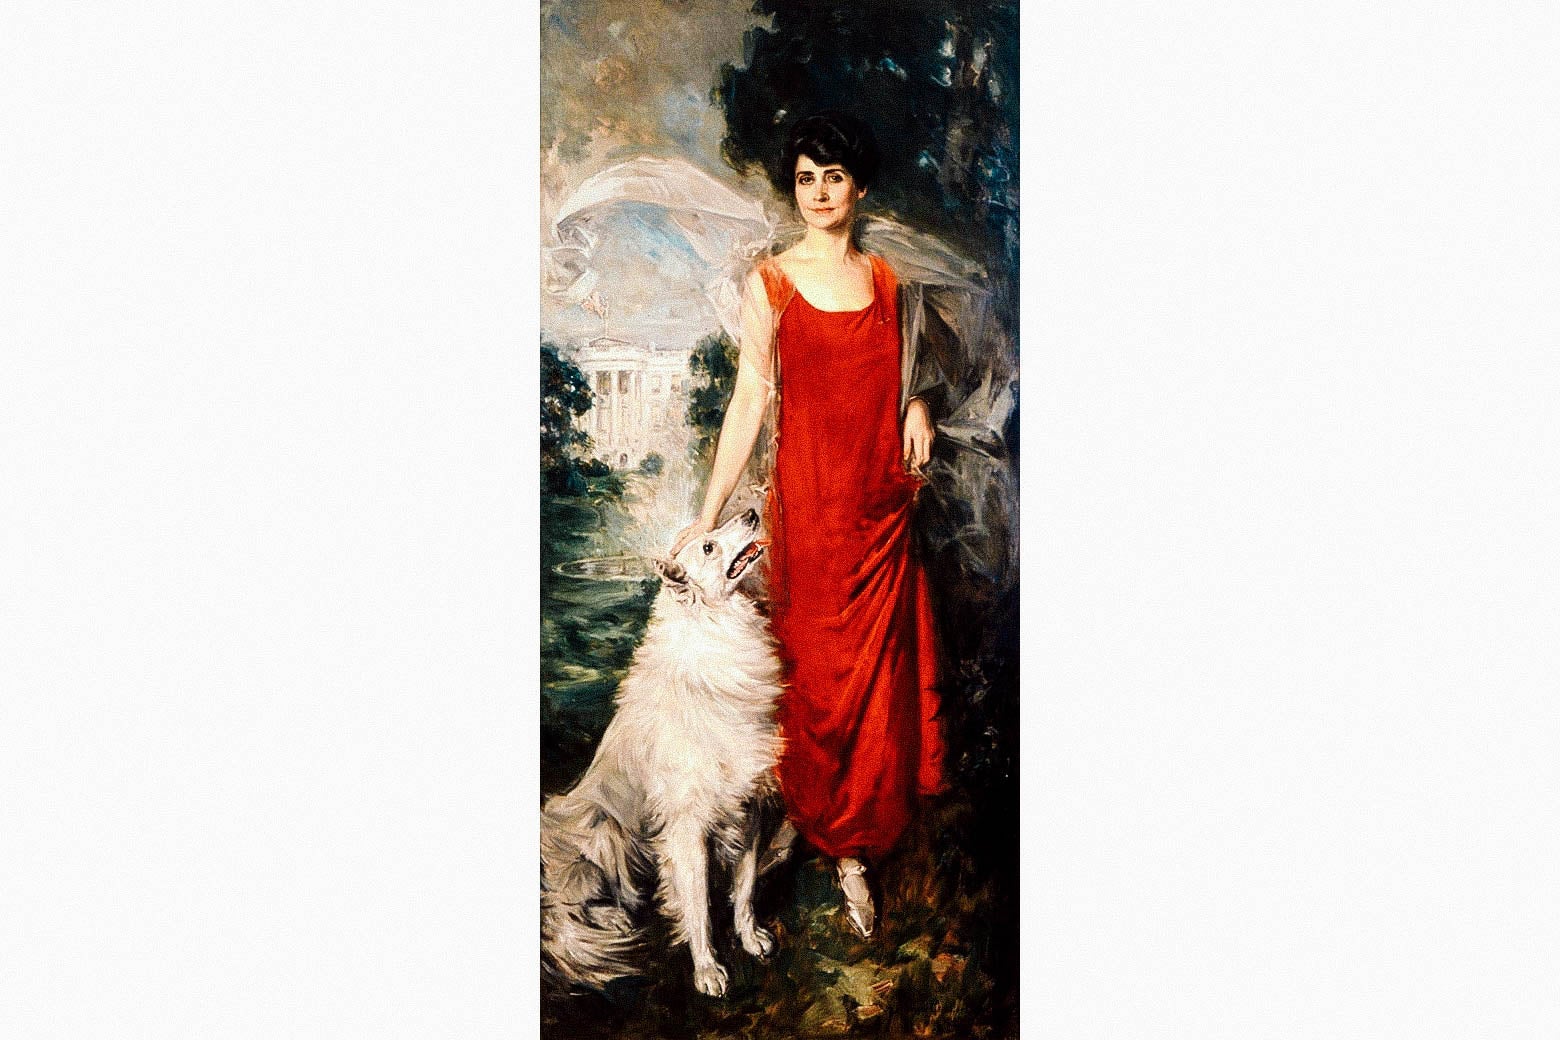 Howard Chandler Christy’s oil portrait of Grace Coolidge in a long red dress, with a white collie looking up at her adoringly.